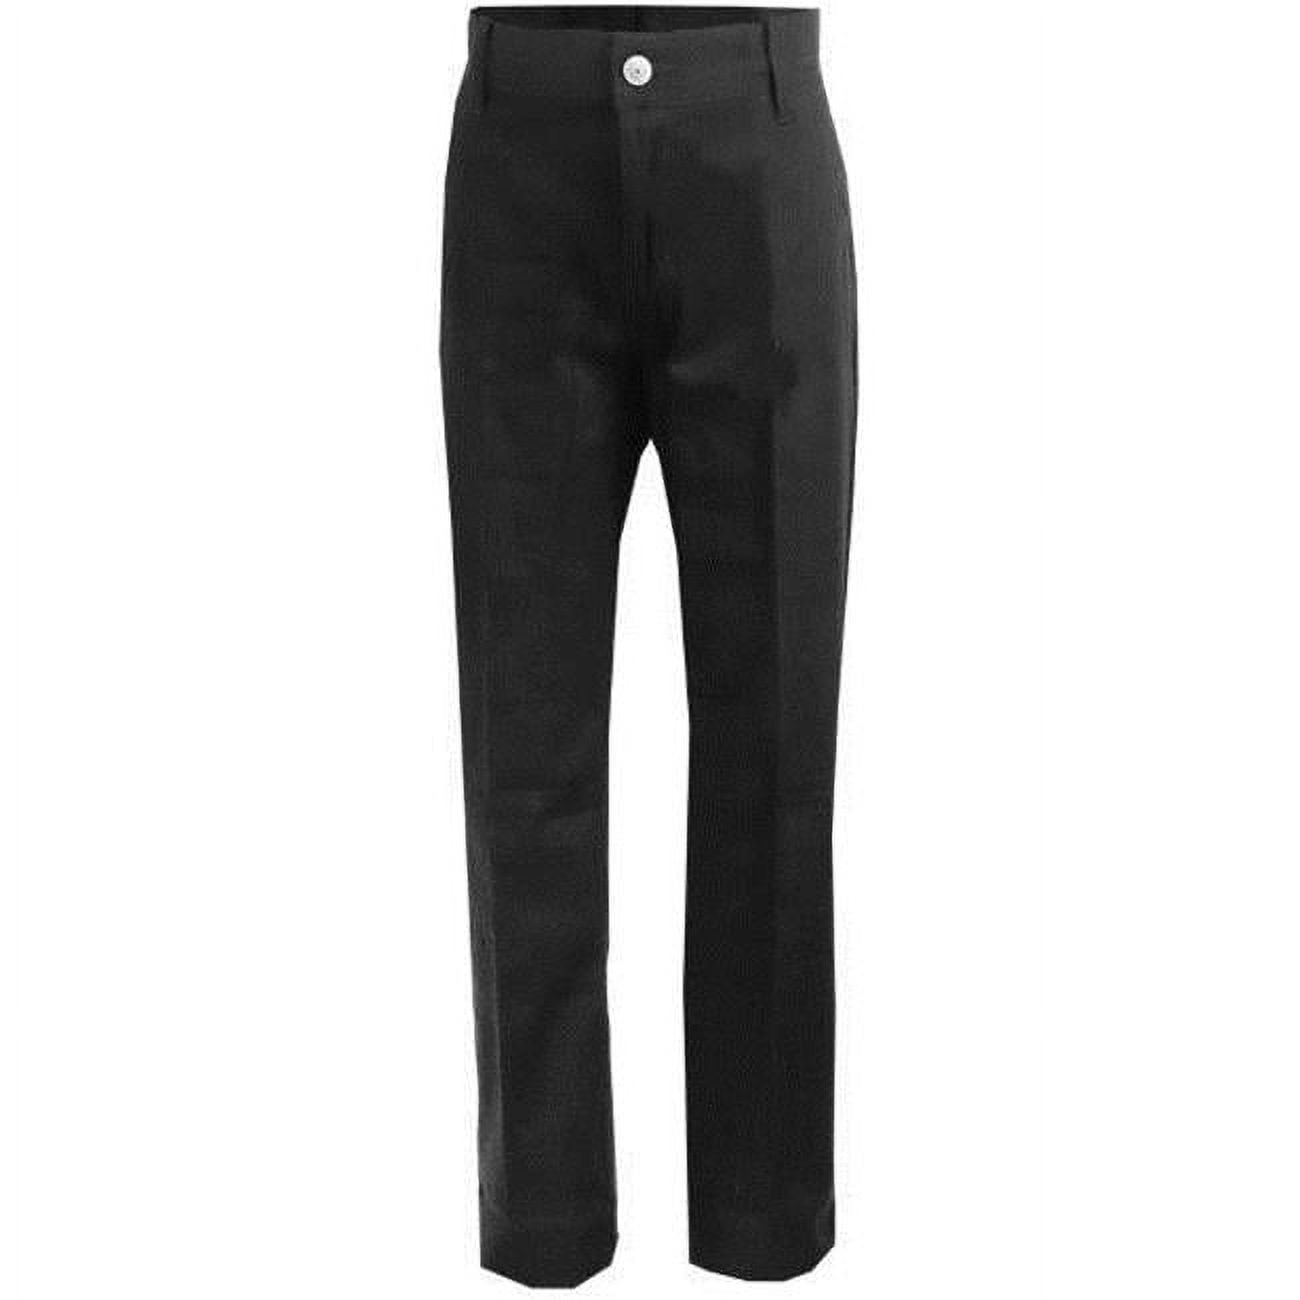 Picture of DDI 2270006 Juniors Black Stretch Straight Leg Pants - Size 13/14 Case of 24